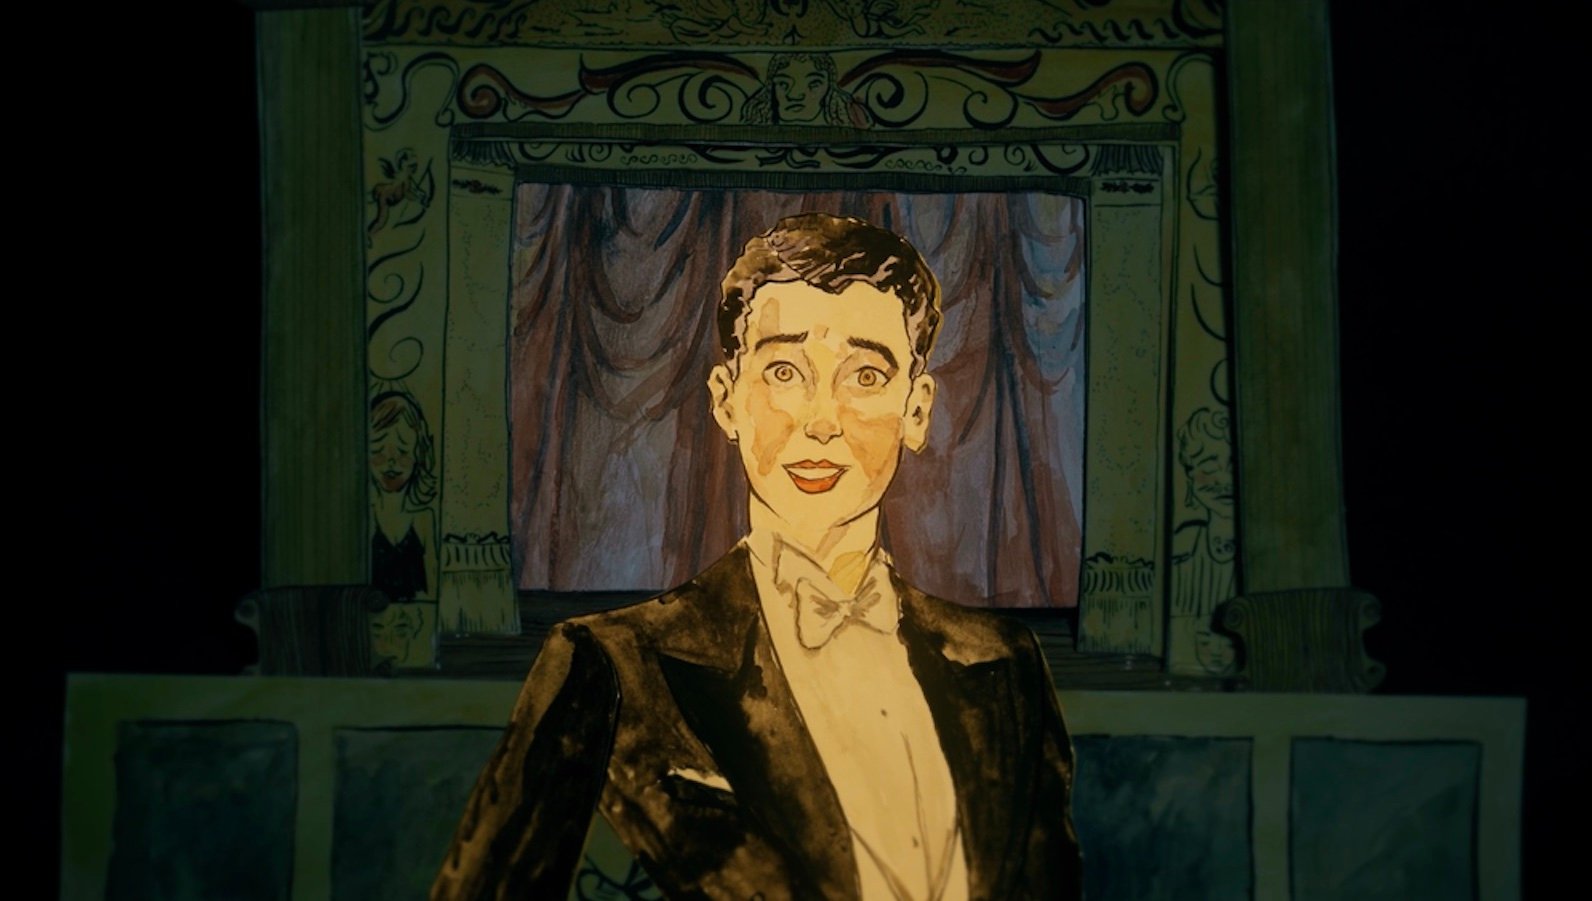 A cartoon drawing of a man in a tuxedo smiling and looking out at camera